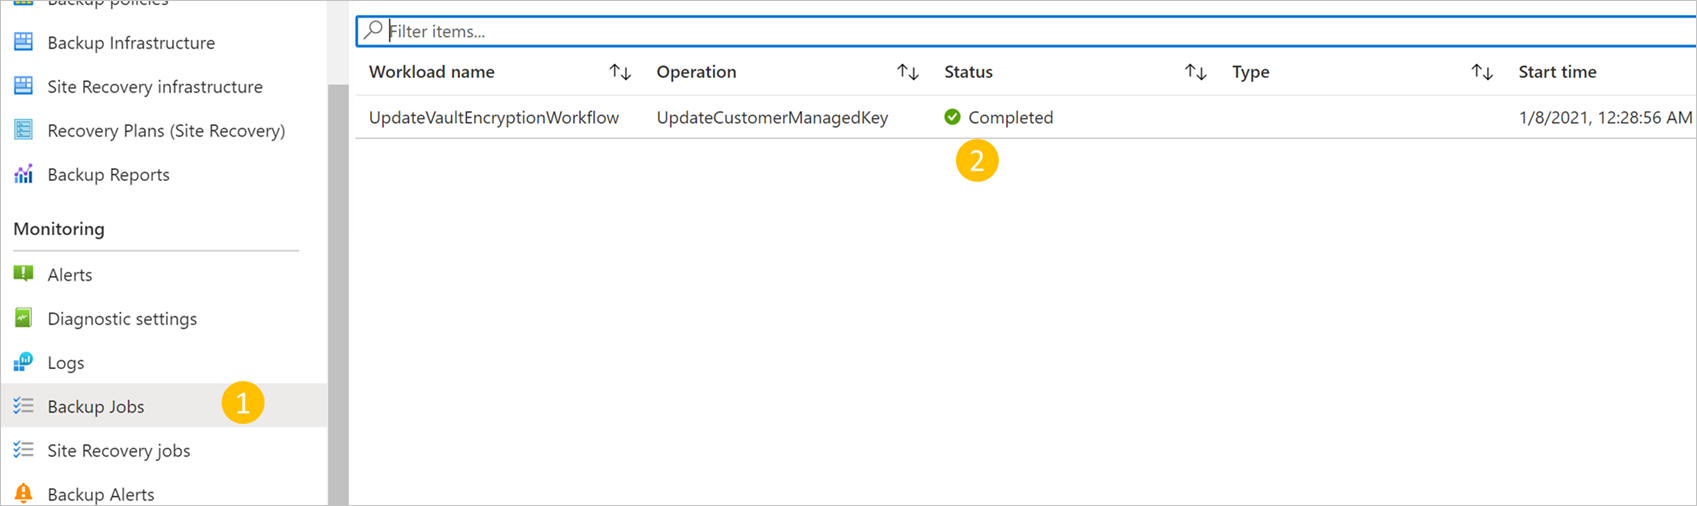 Screenshot that shows the status of a backup job as completed.